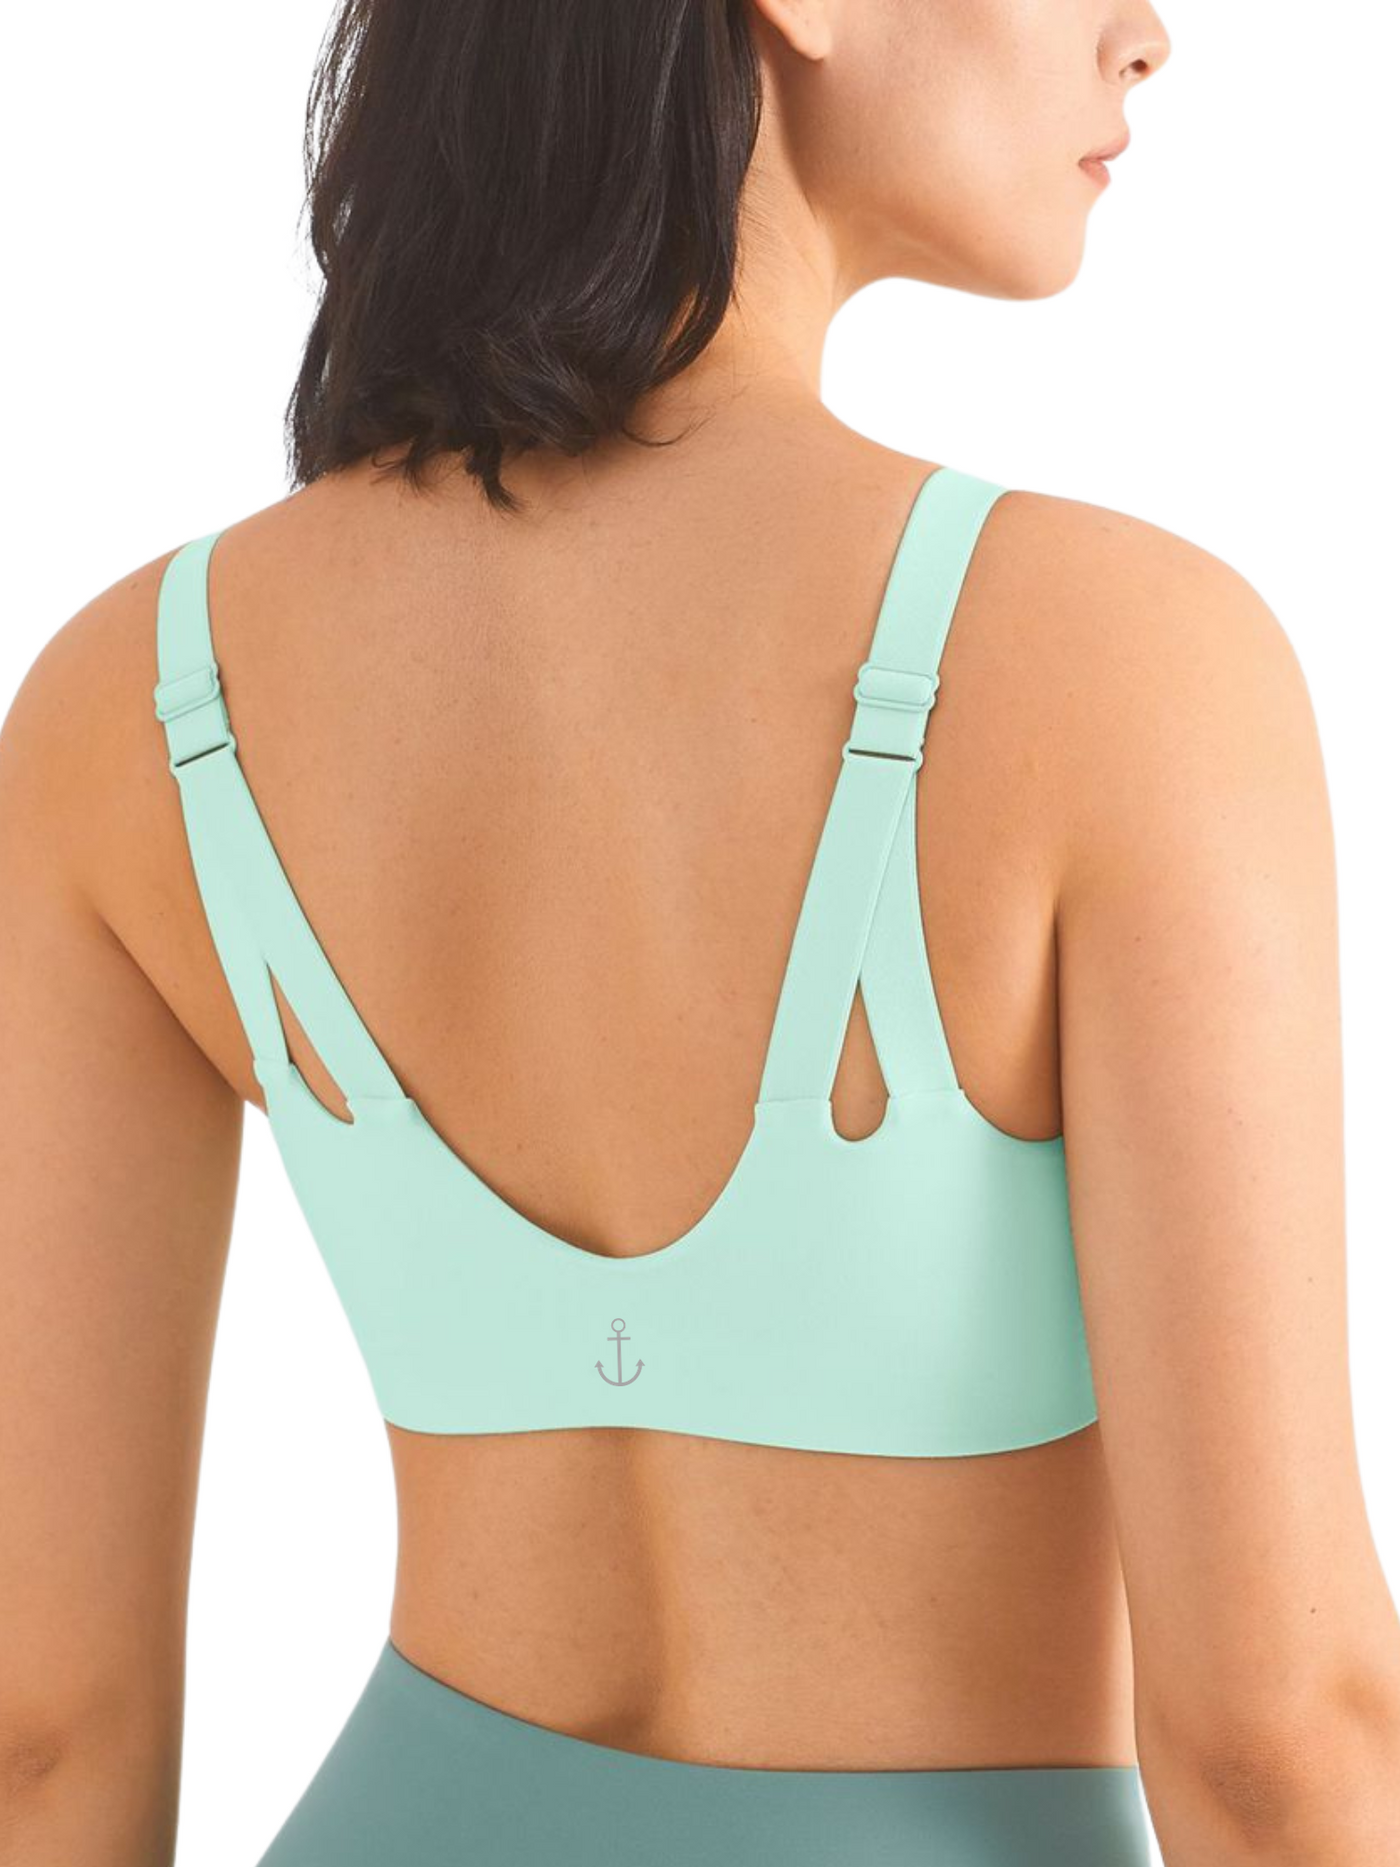 Mint Green Eleanor Bra Back View with Anchor Logo